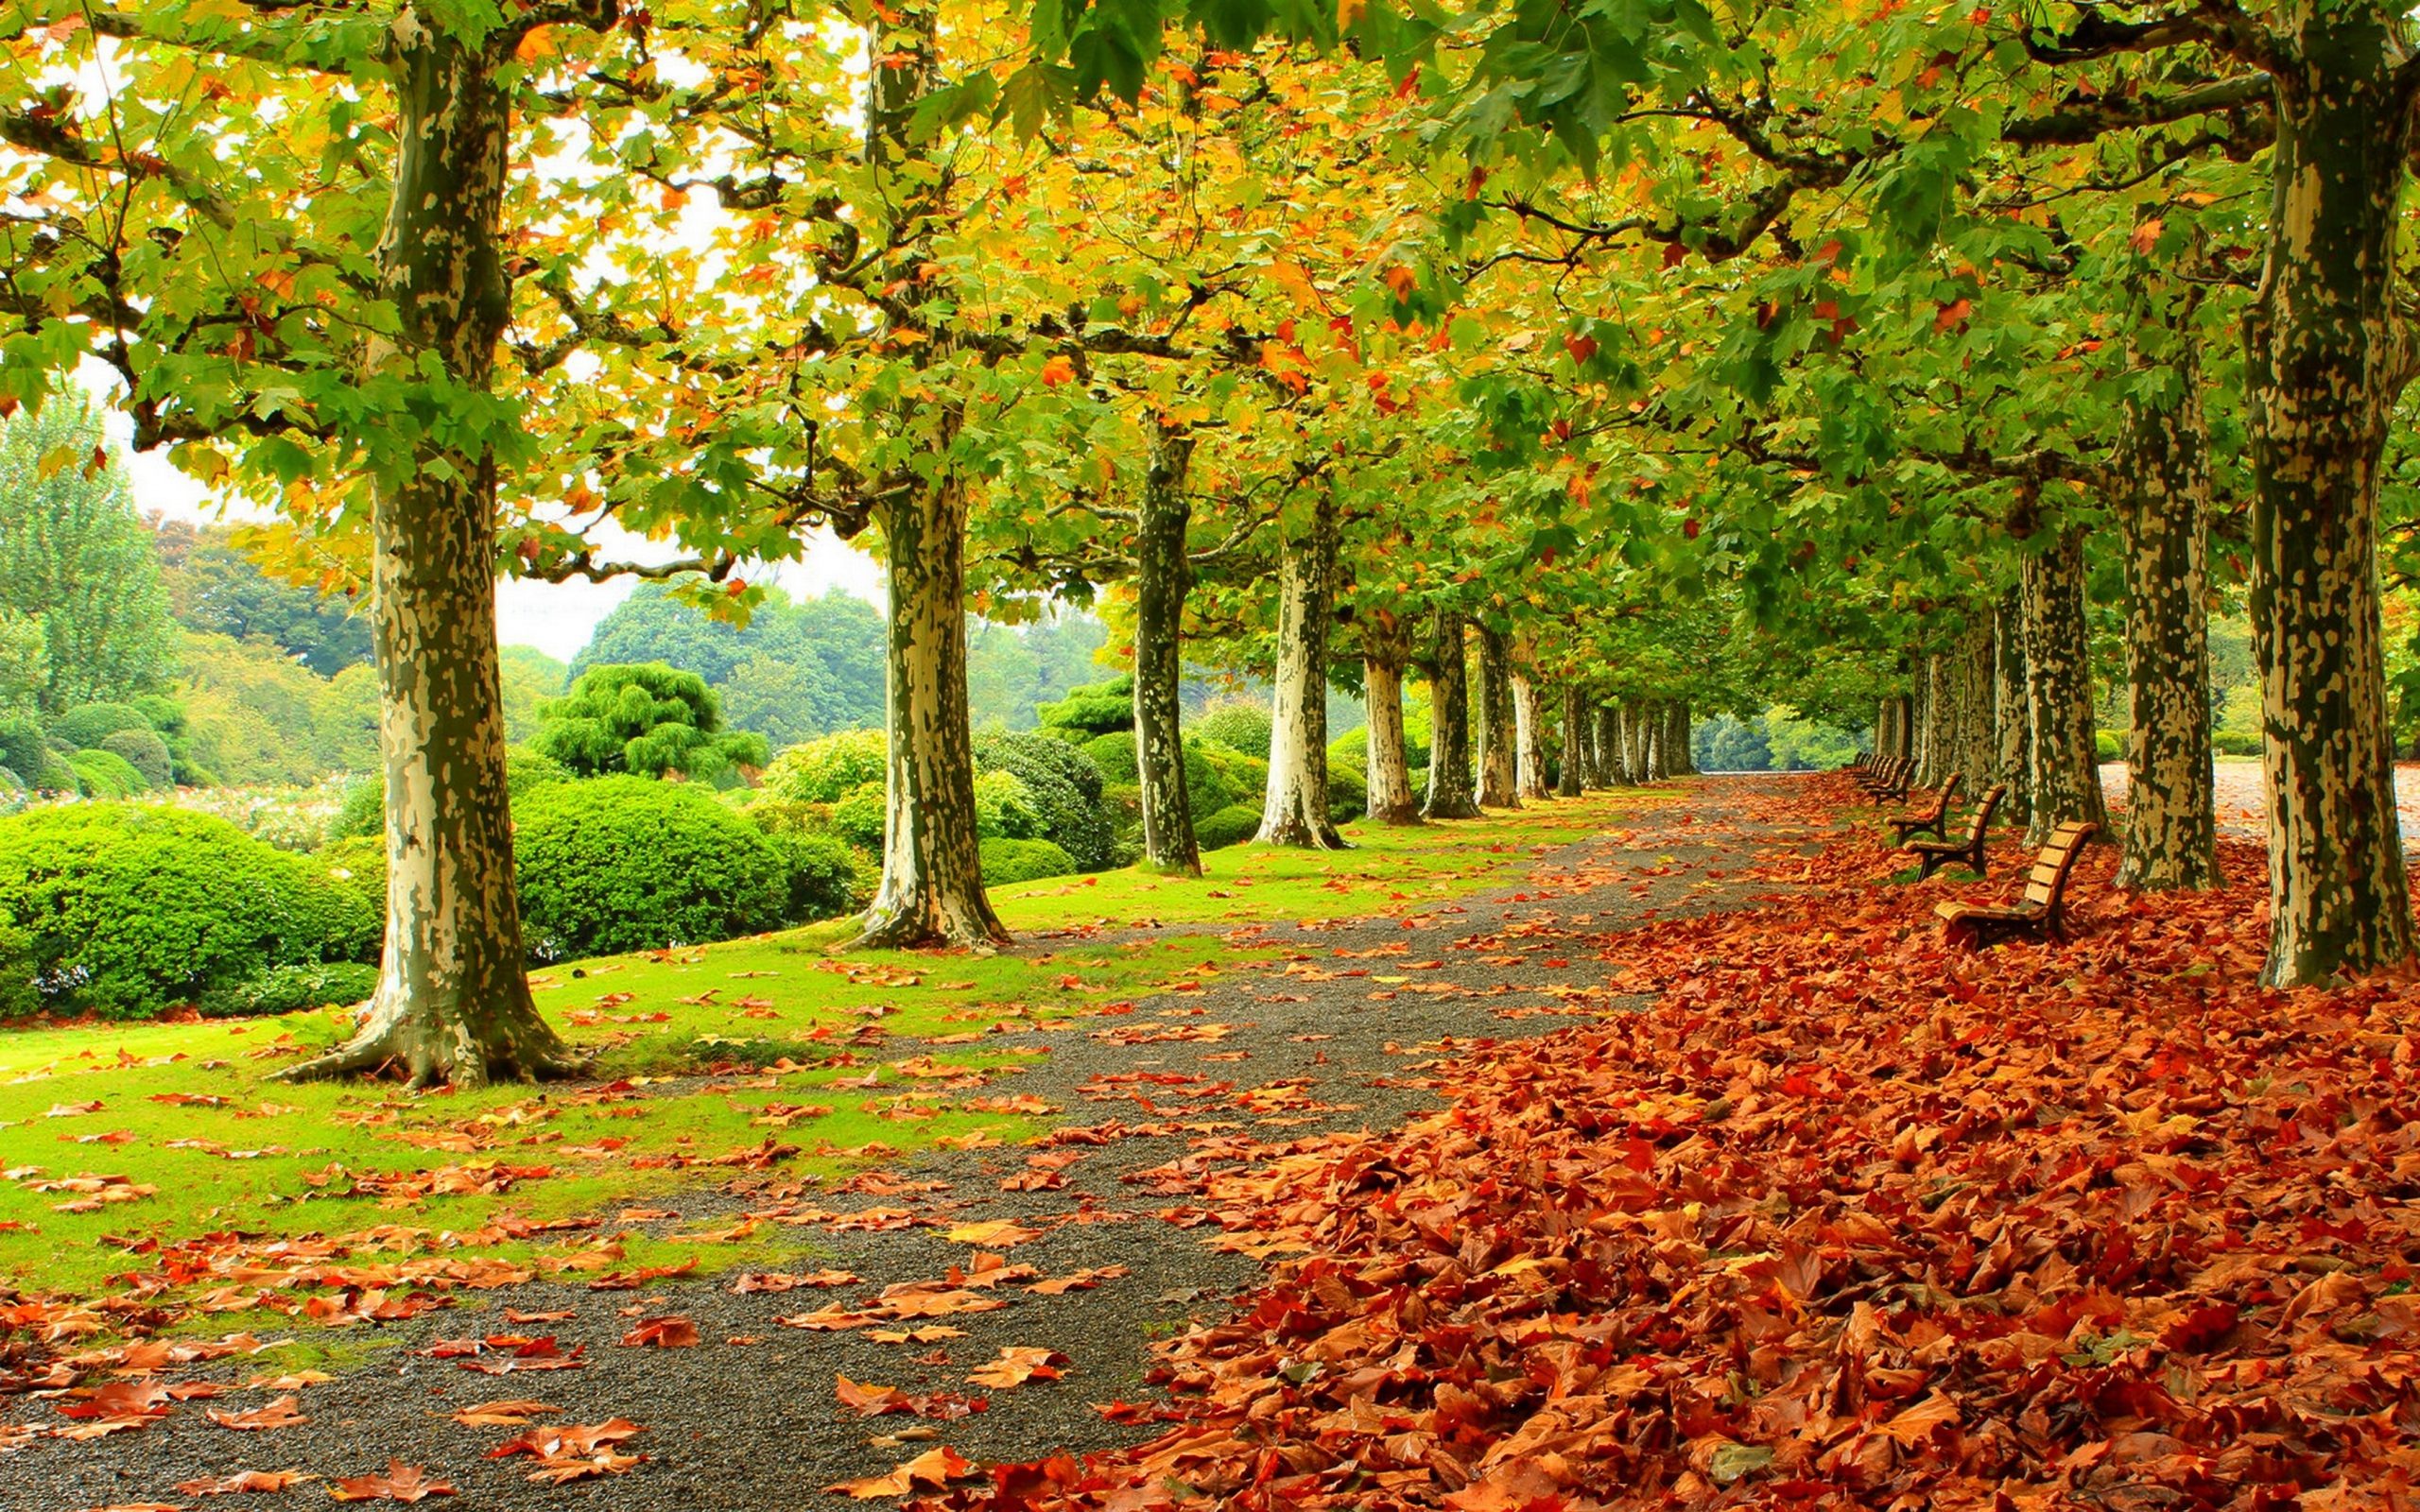 Autumn Fall Deciduous Trees Park Fallen Red Leaves Wooden Benches Road